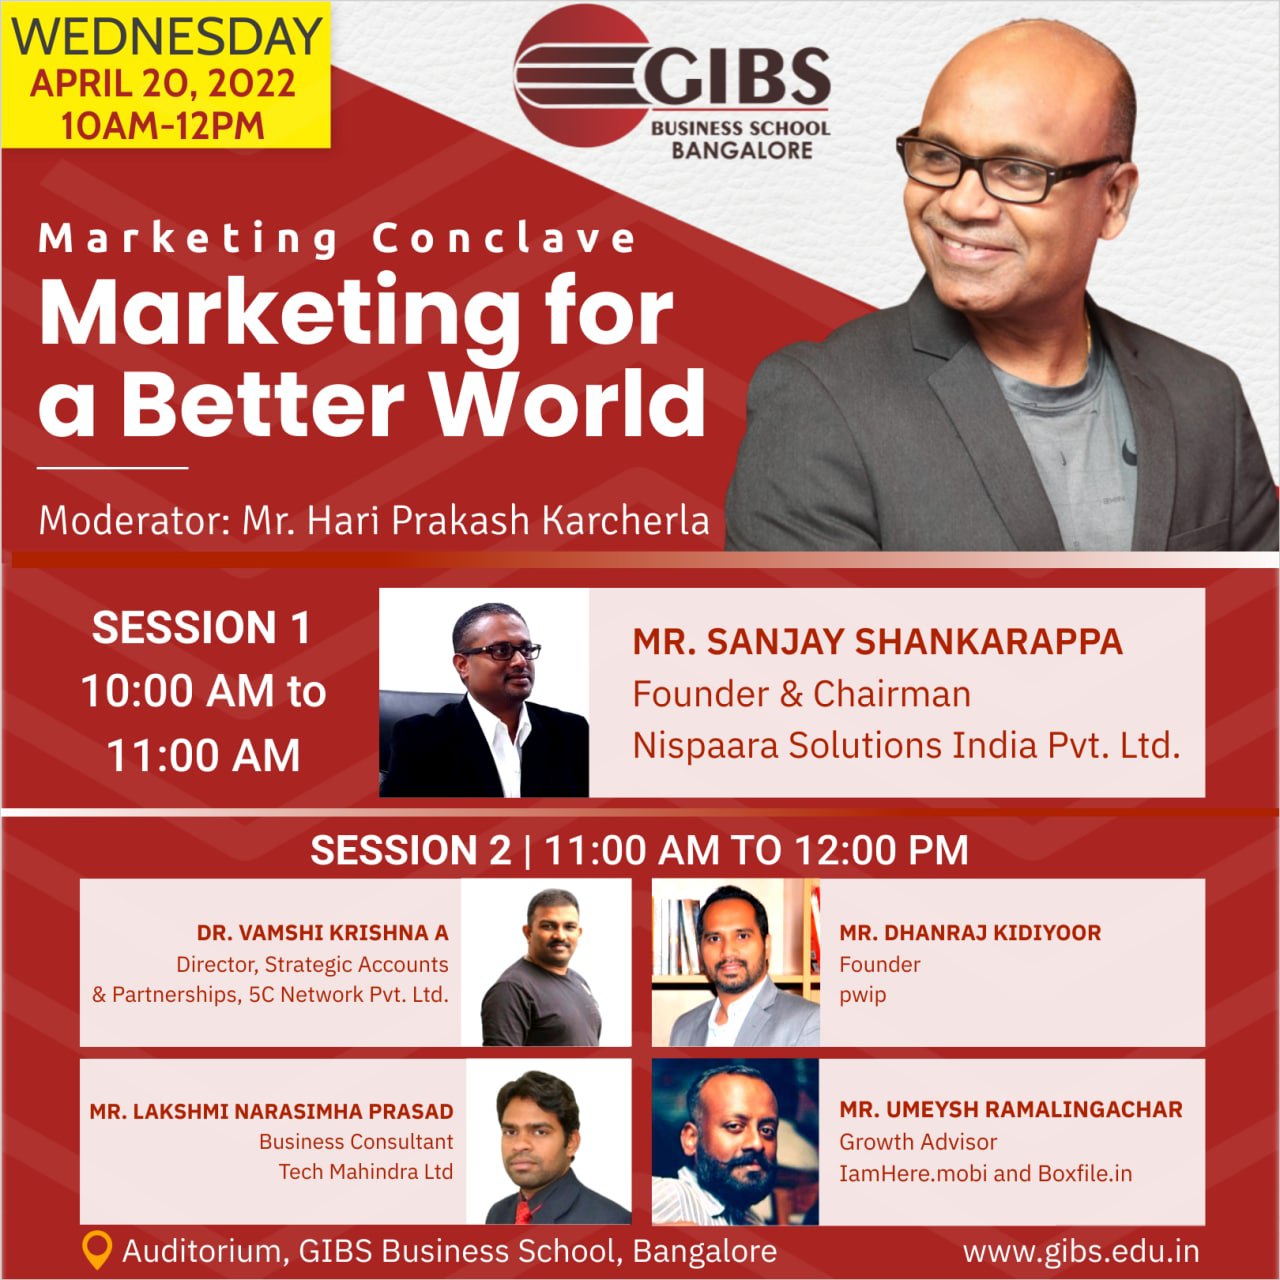 marketing conference gibs business school bangalore